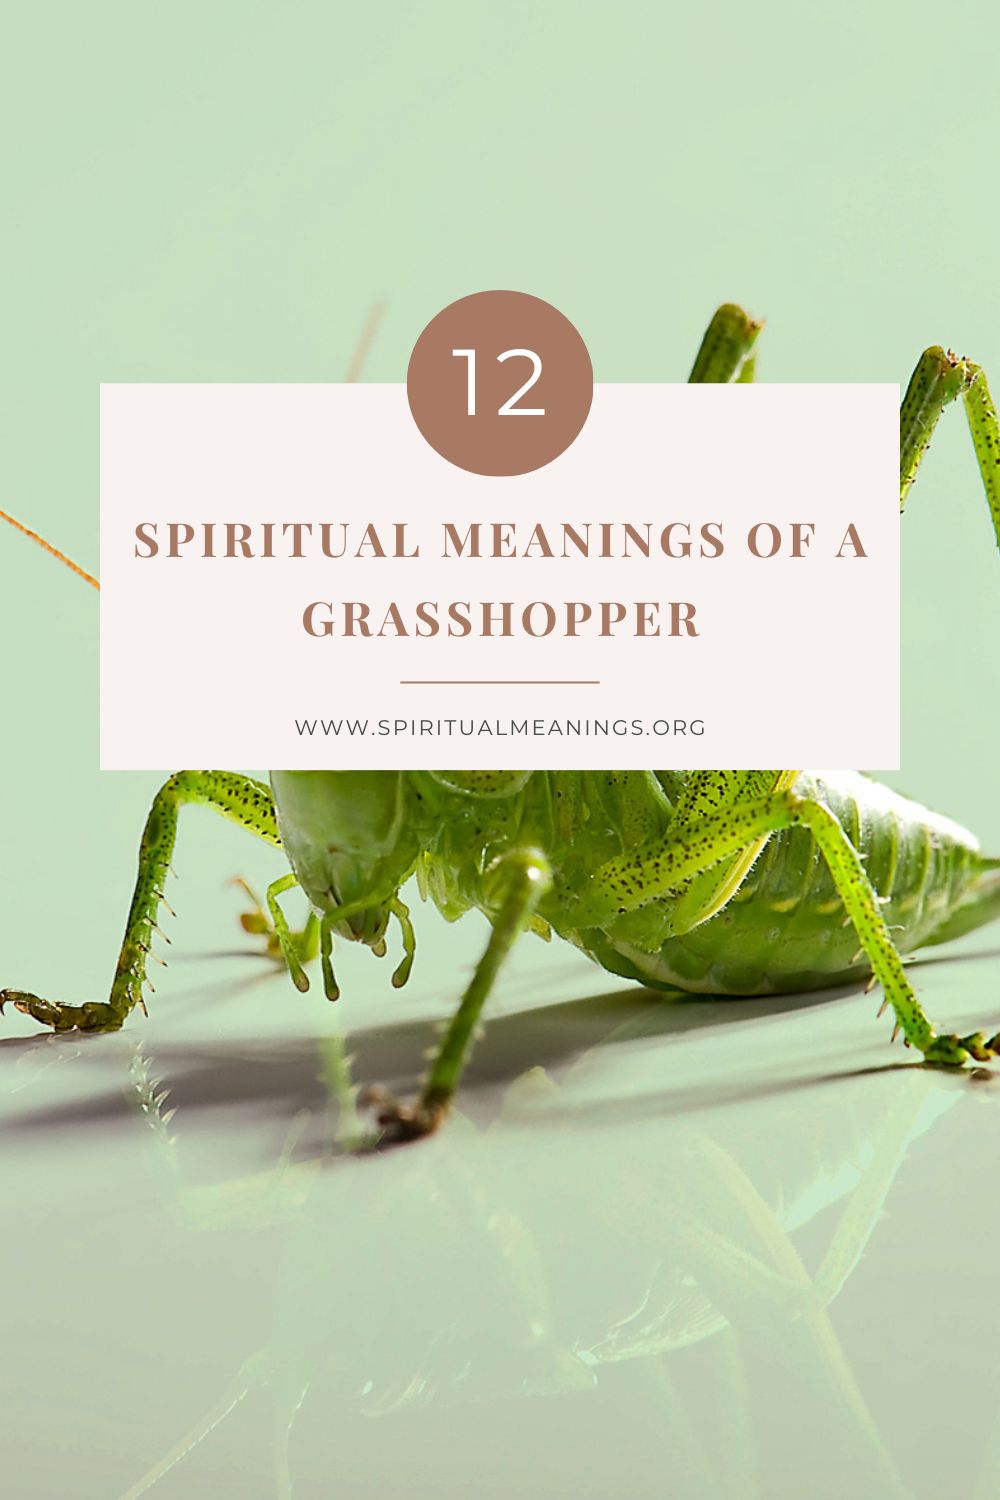 Grasshoppers as Spiritual Meanings Messengers  